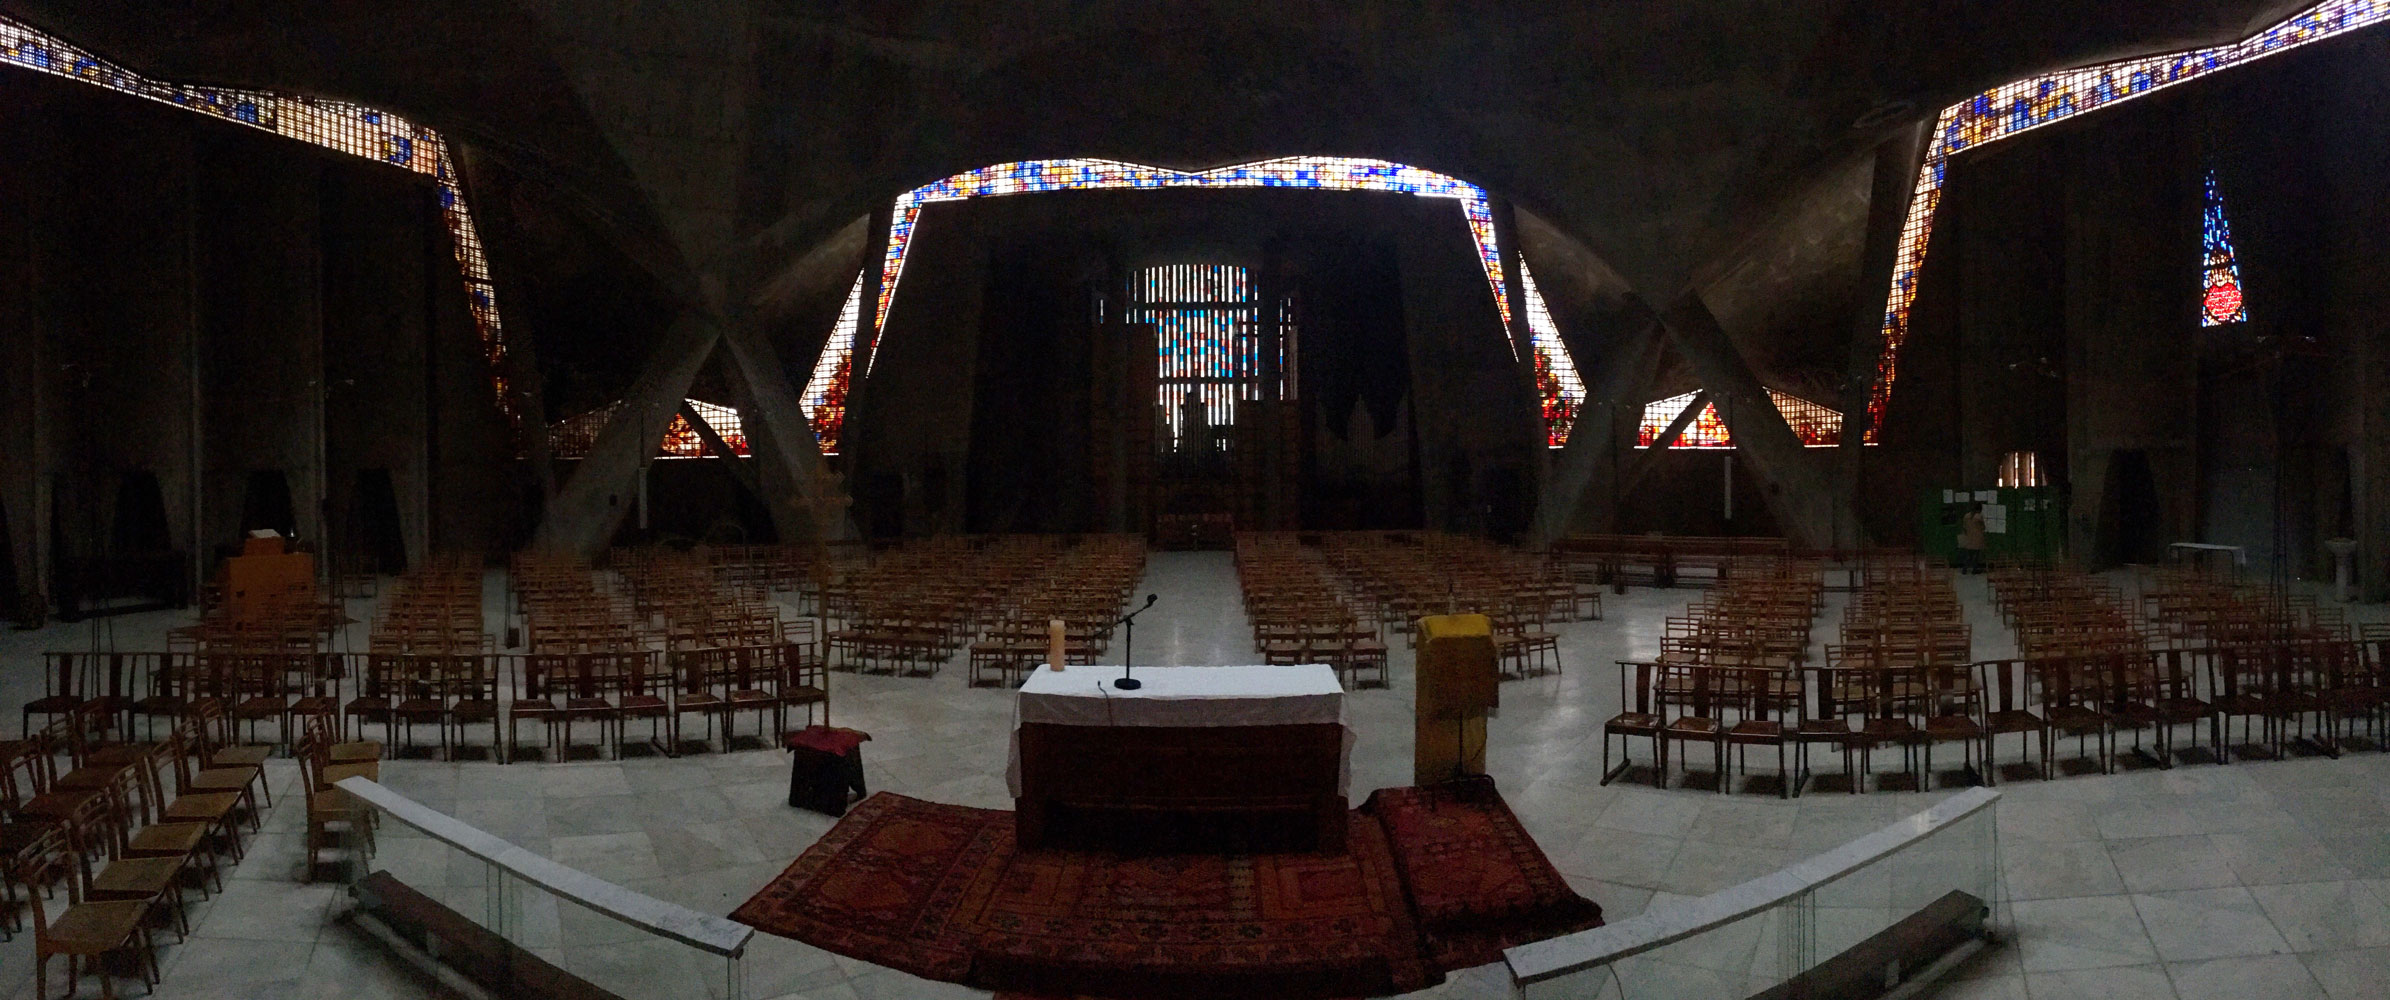 <p>View from behind of the alter and chairs toward the opposite wall</p>